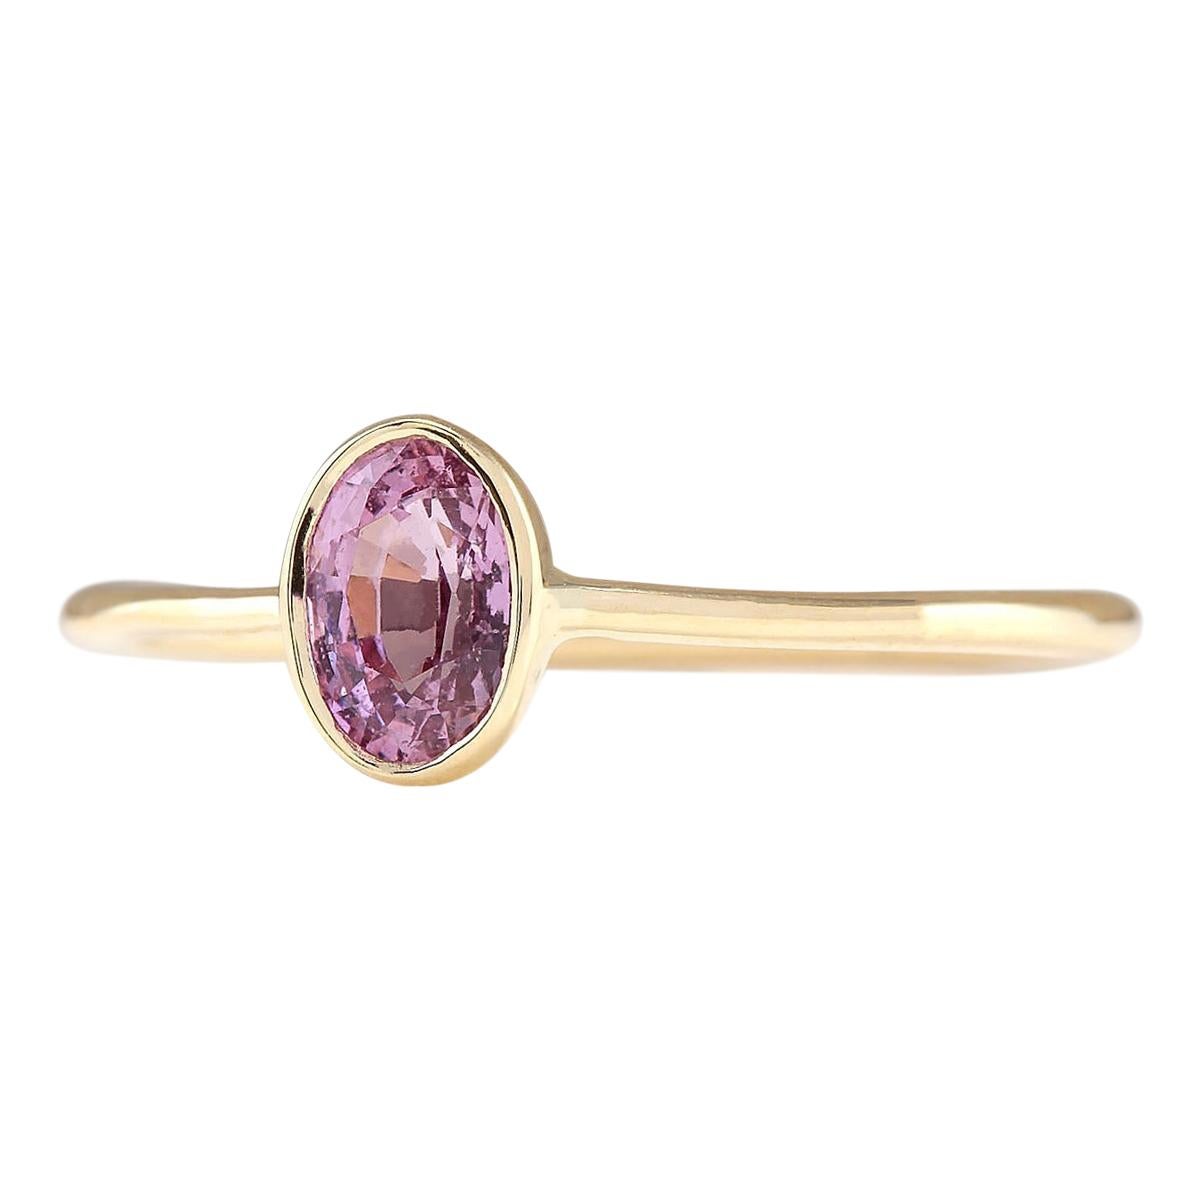 Stamped: 14K Yellow Gold
Total Ring Weight: 1.2 Grams
Total Natural Sapphire Weight is 0.70 Carat (Measures: 6.00x4.00 mm)
Color: Pink
Face Measures: 6.00x4.00 mm
Sku: [703215W]